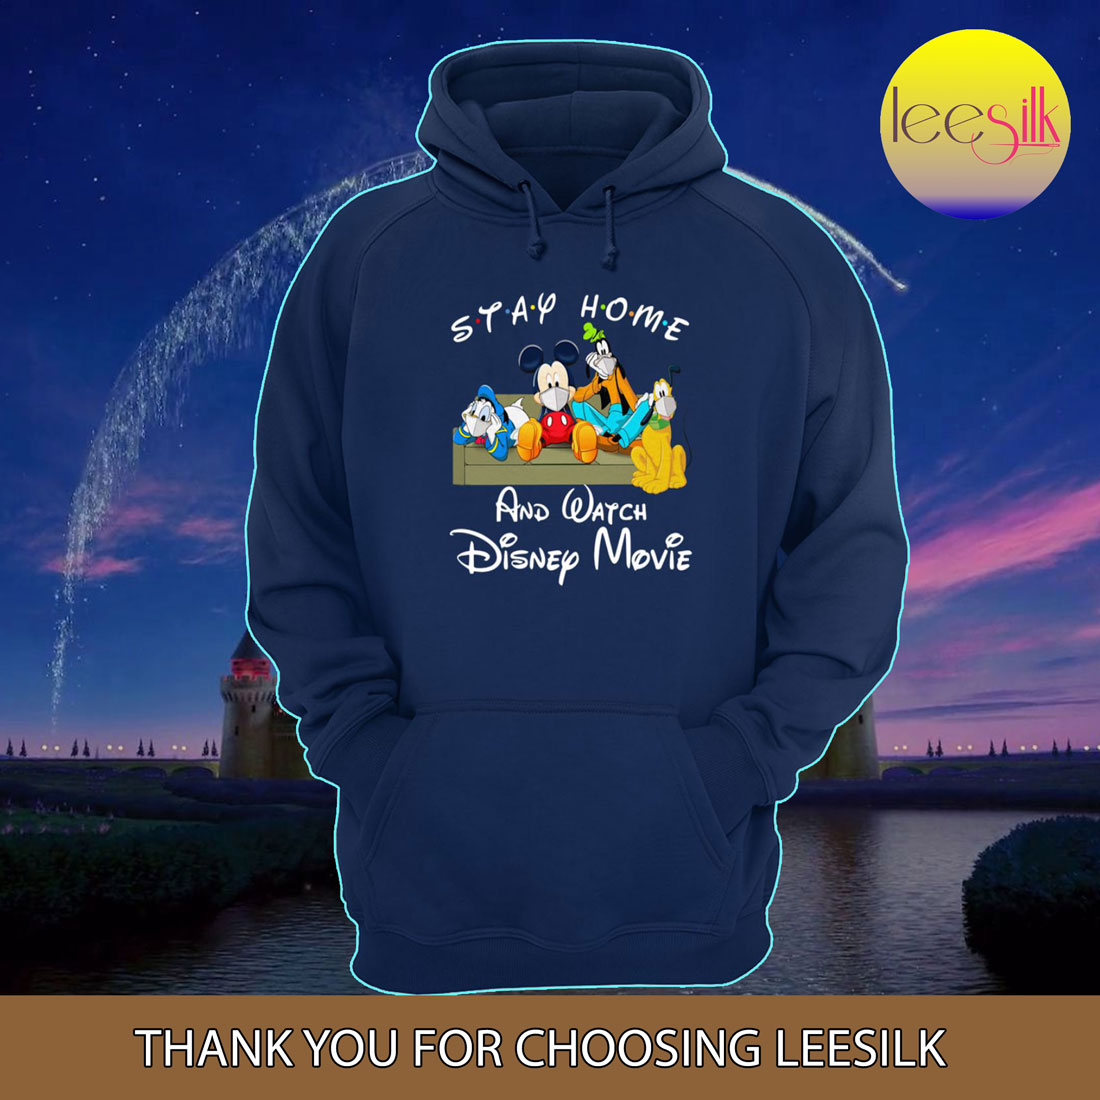 Stay-home-and-watch-Disney-movie-hoodie